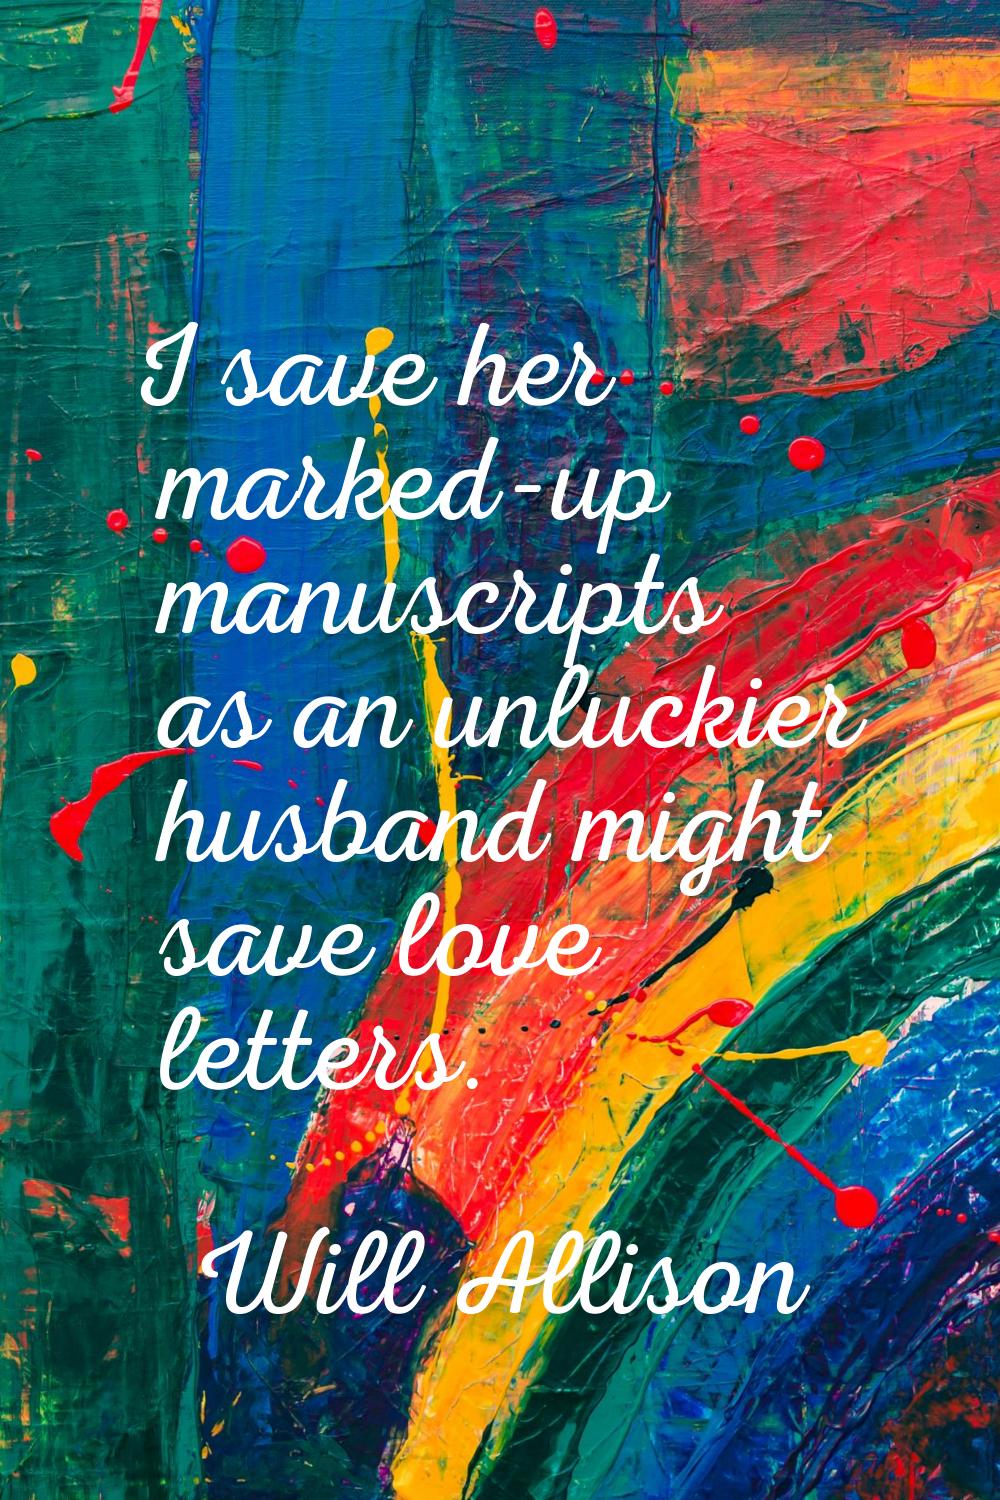 I save her marked-up manuscripts as an unluckier husband might save love letters.